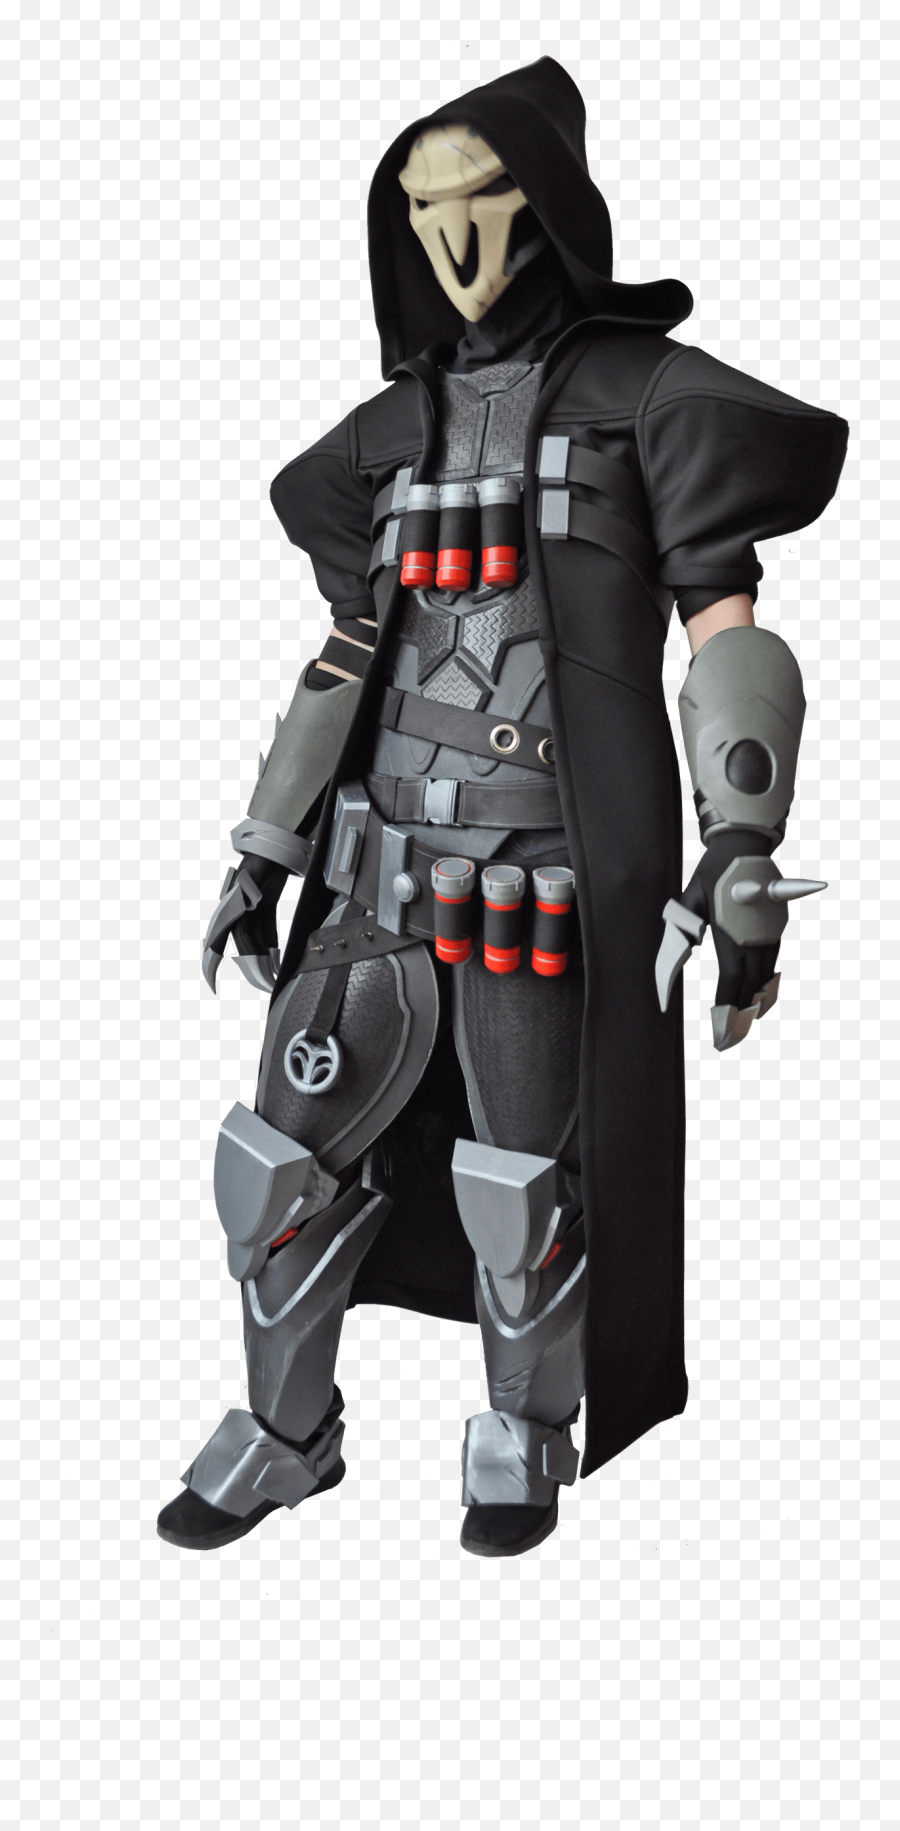 Overwatch Reaper Png - Cool Reaper Overwatch Png,Reaper Overwatch Png